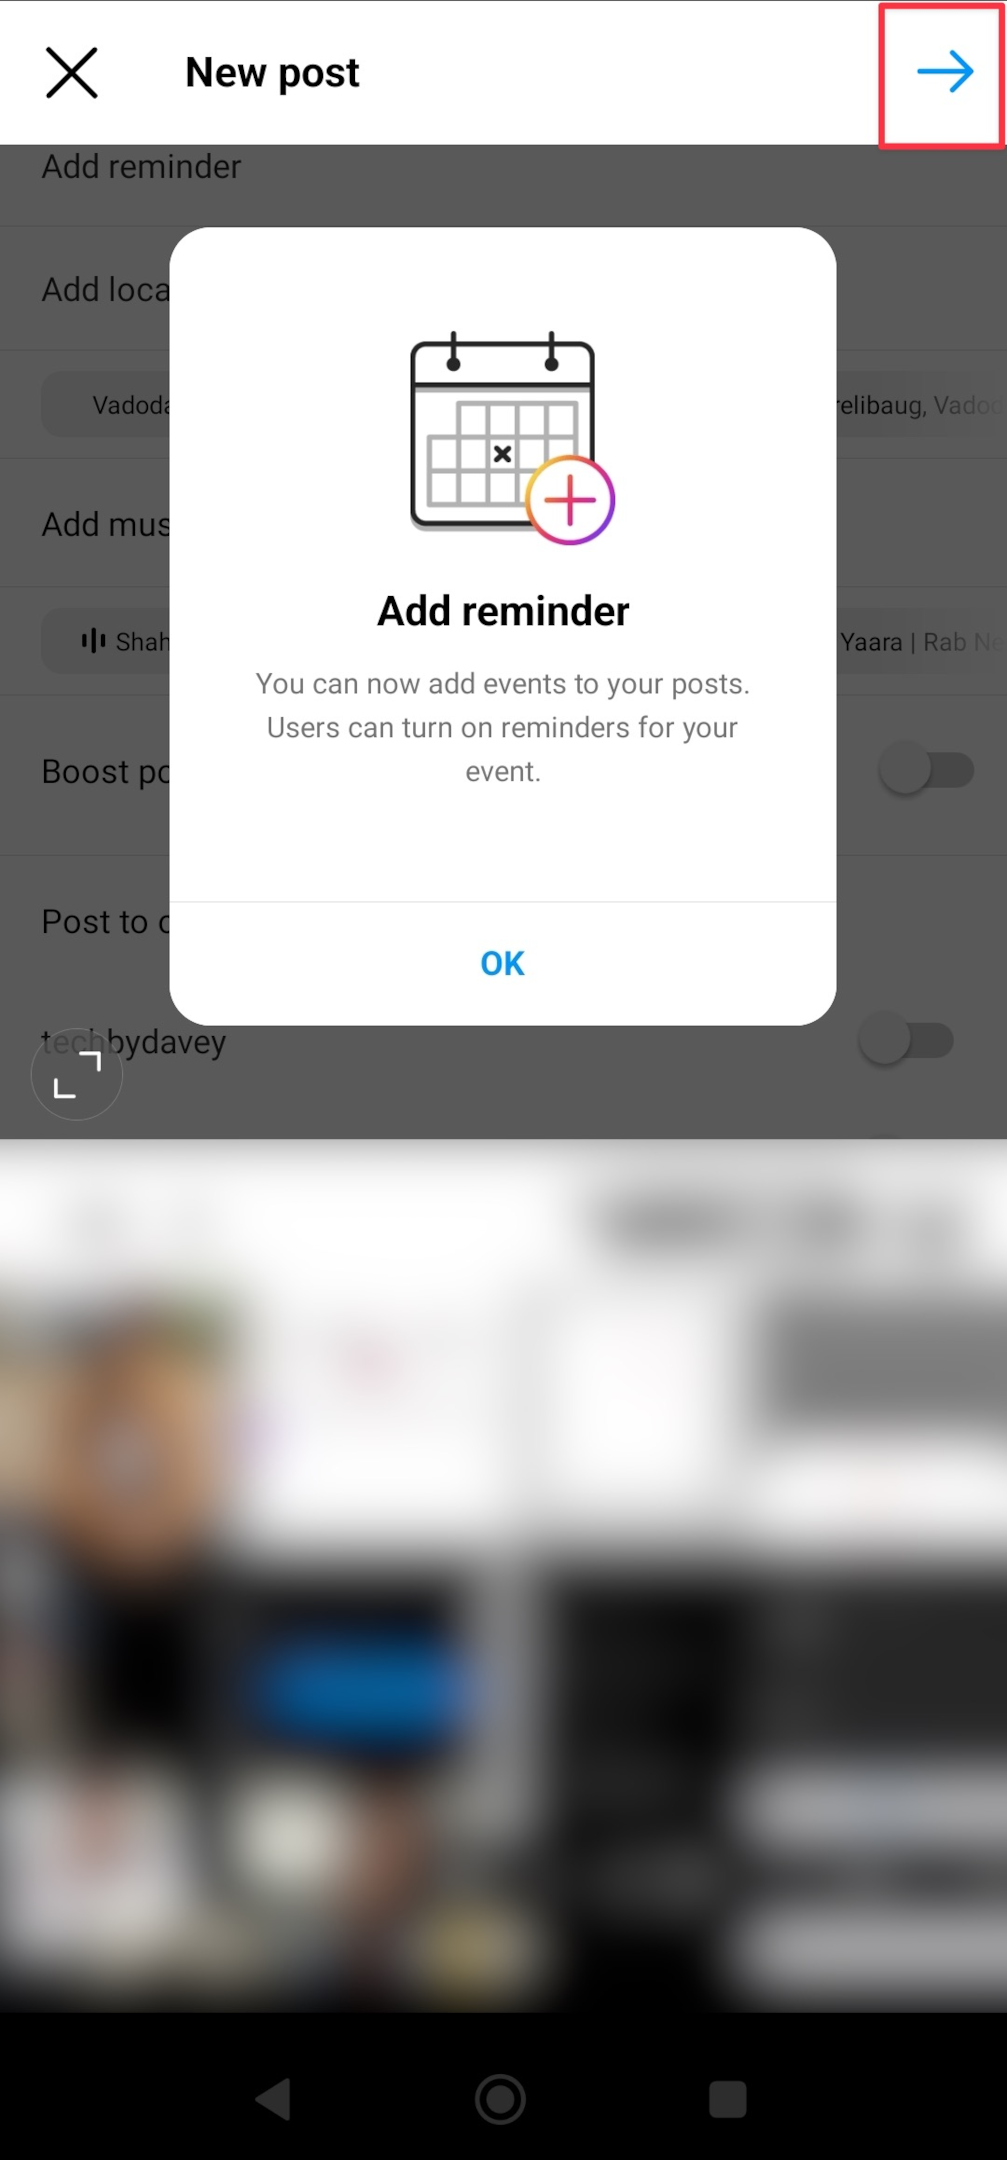 Remote.tools shows how to select a photo to post on Instagram for Android app